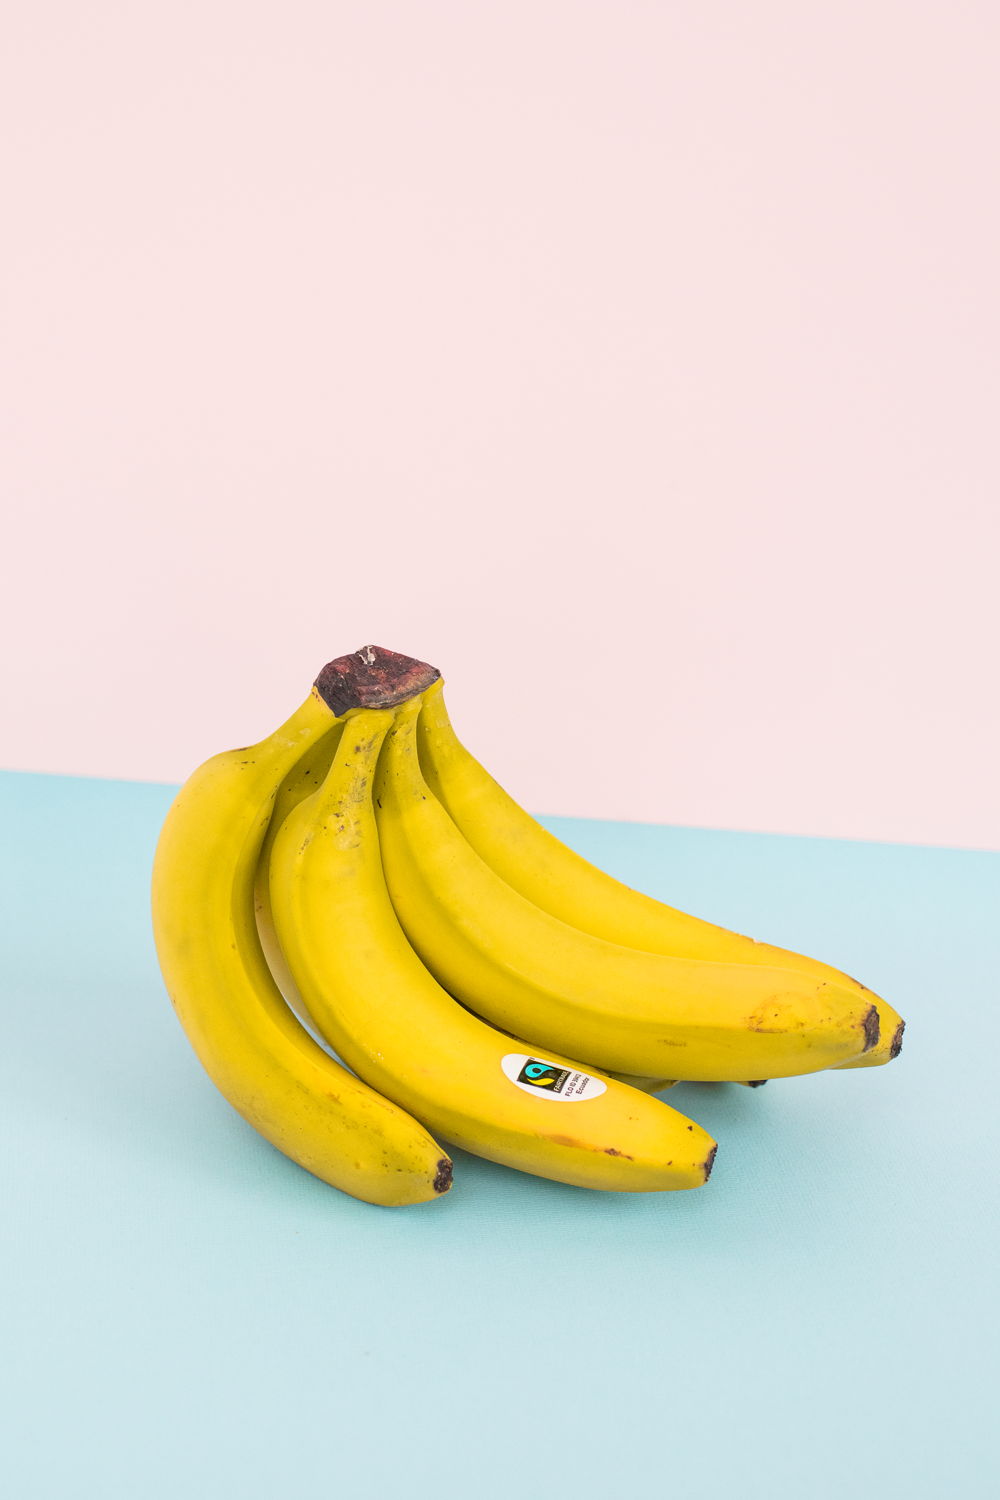 Bananas on blue/pink background